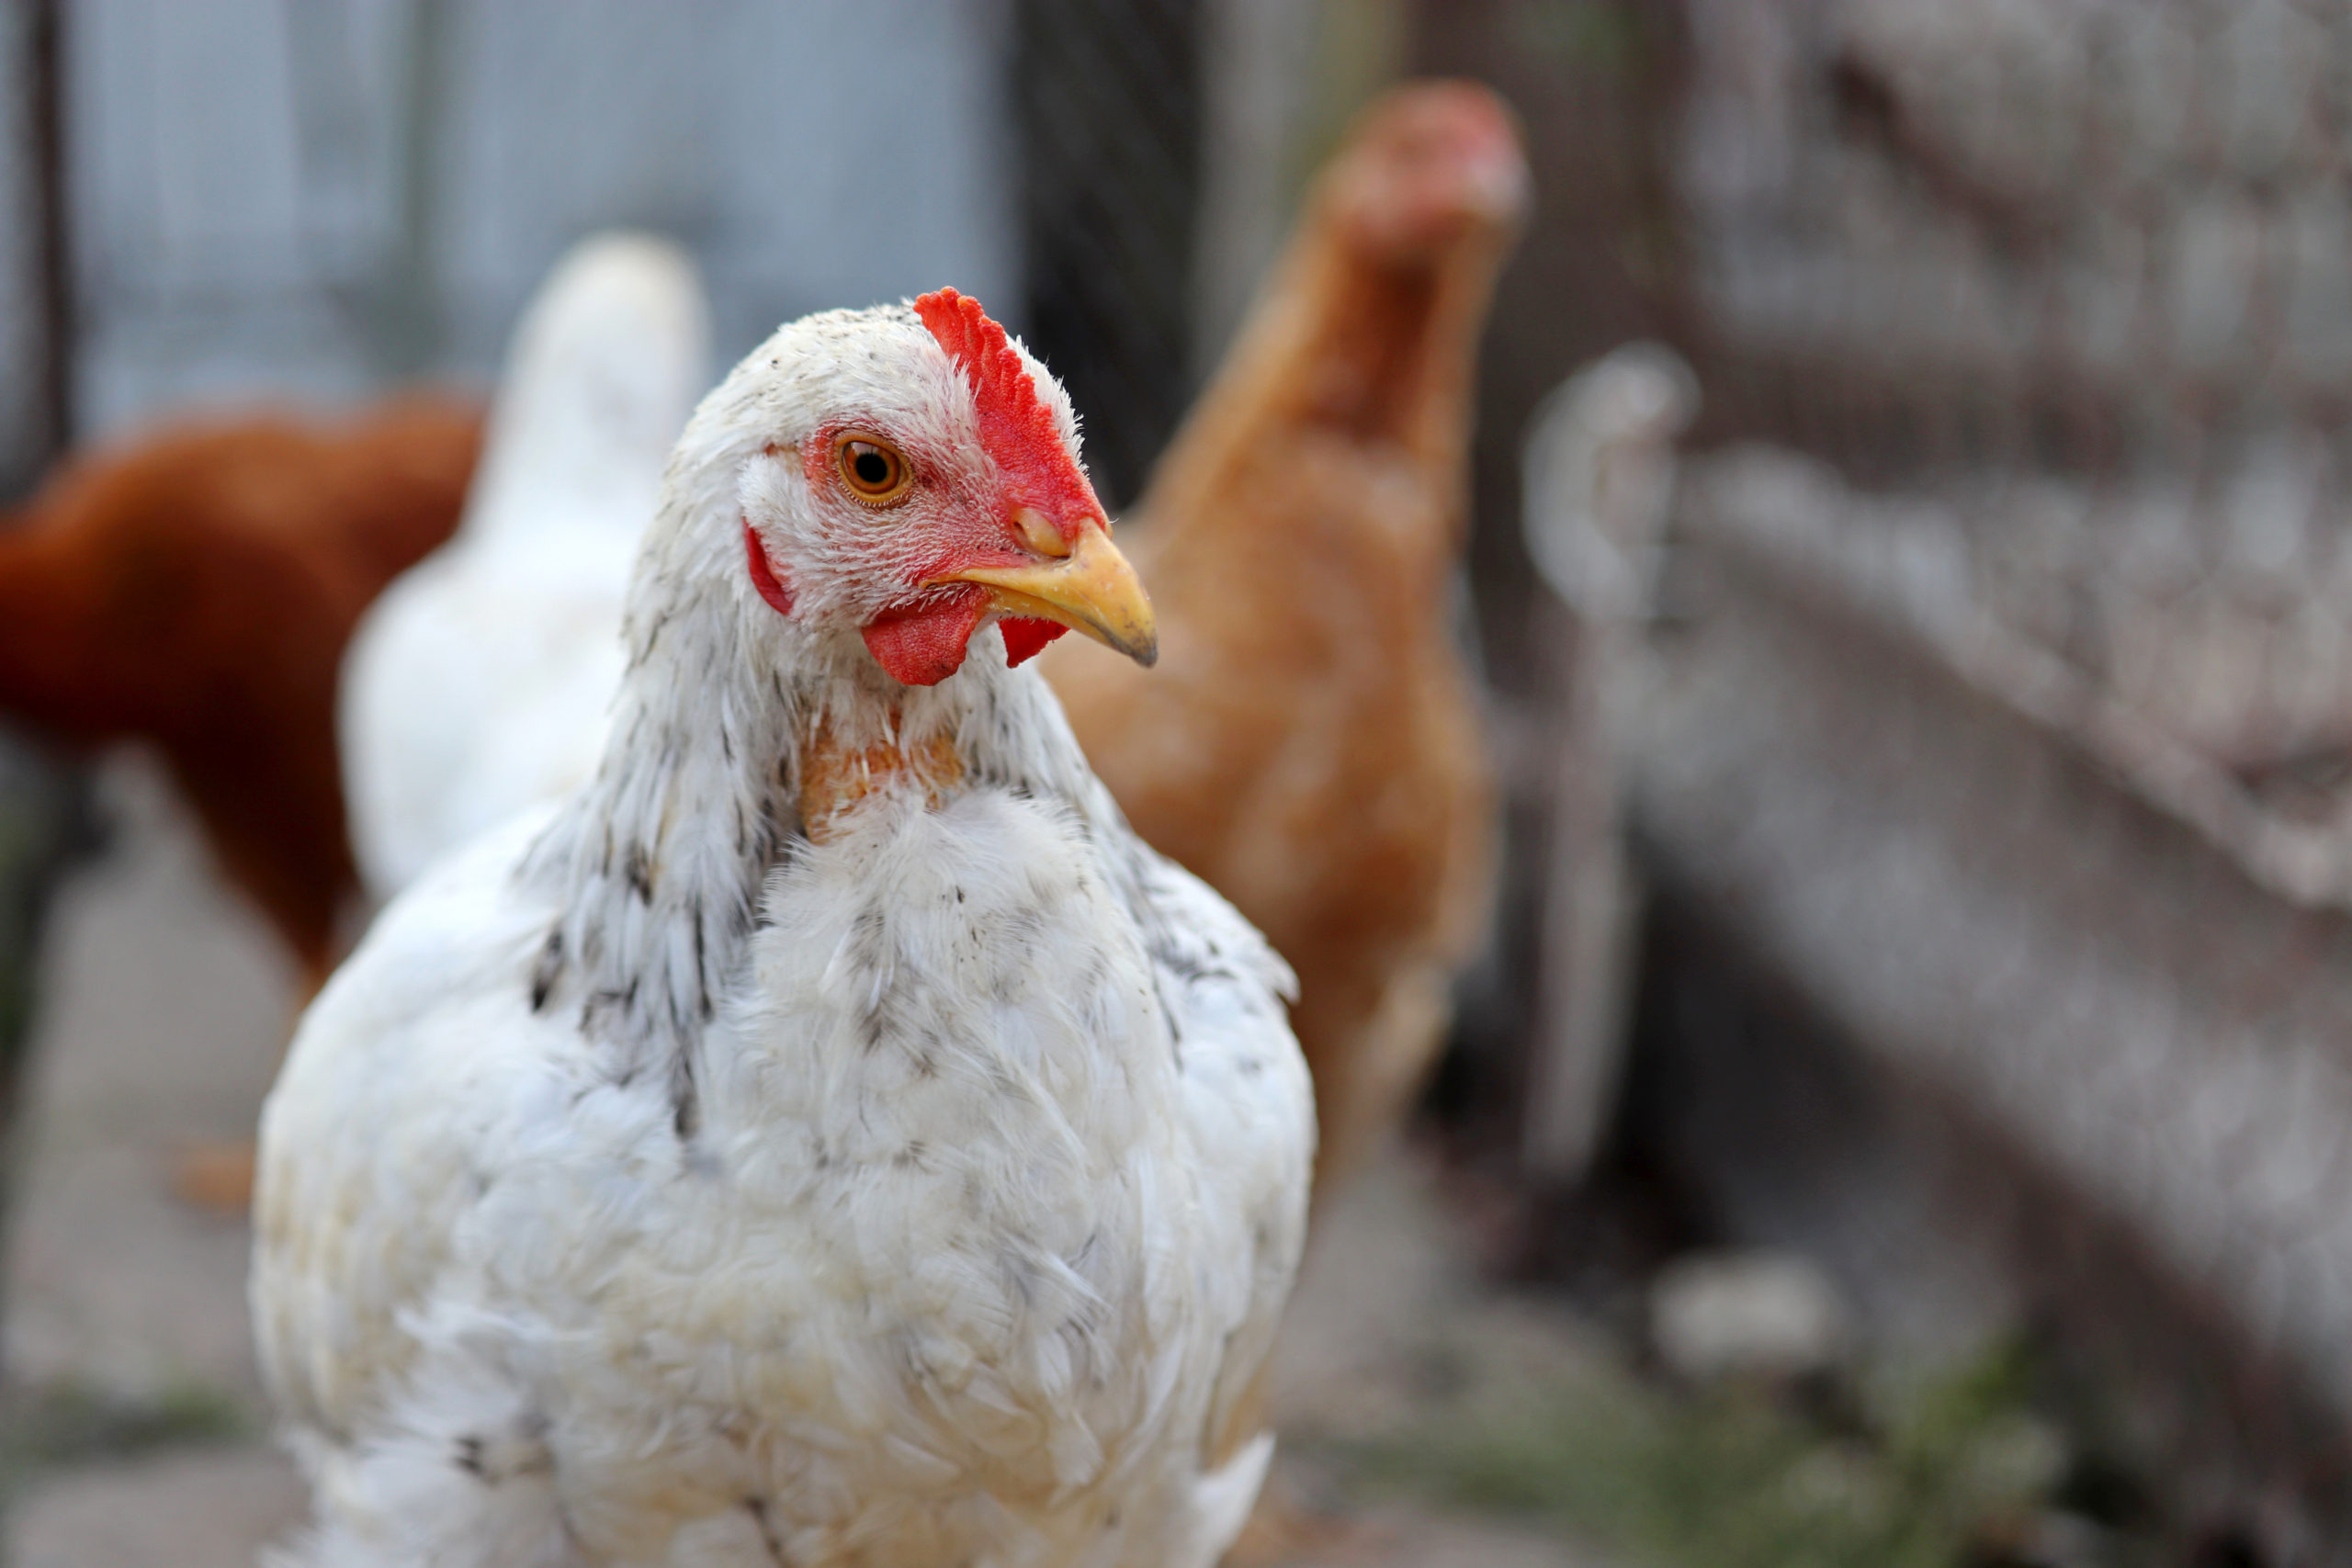 Highly Pathogenic Avian Flu Found at Lancaster County Poultry Farm